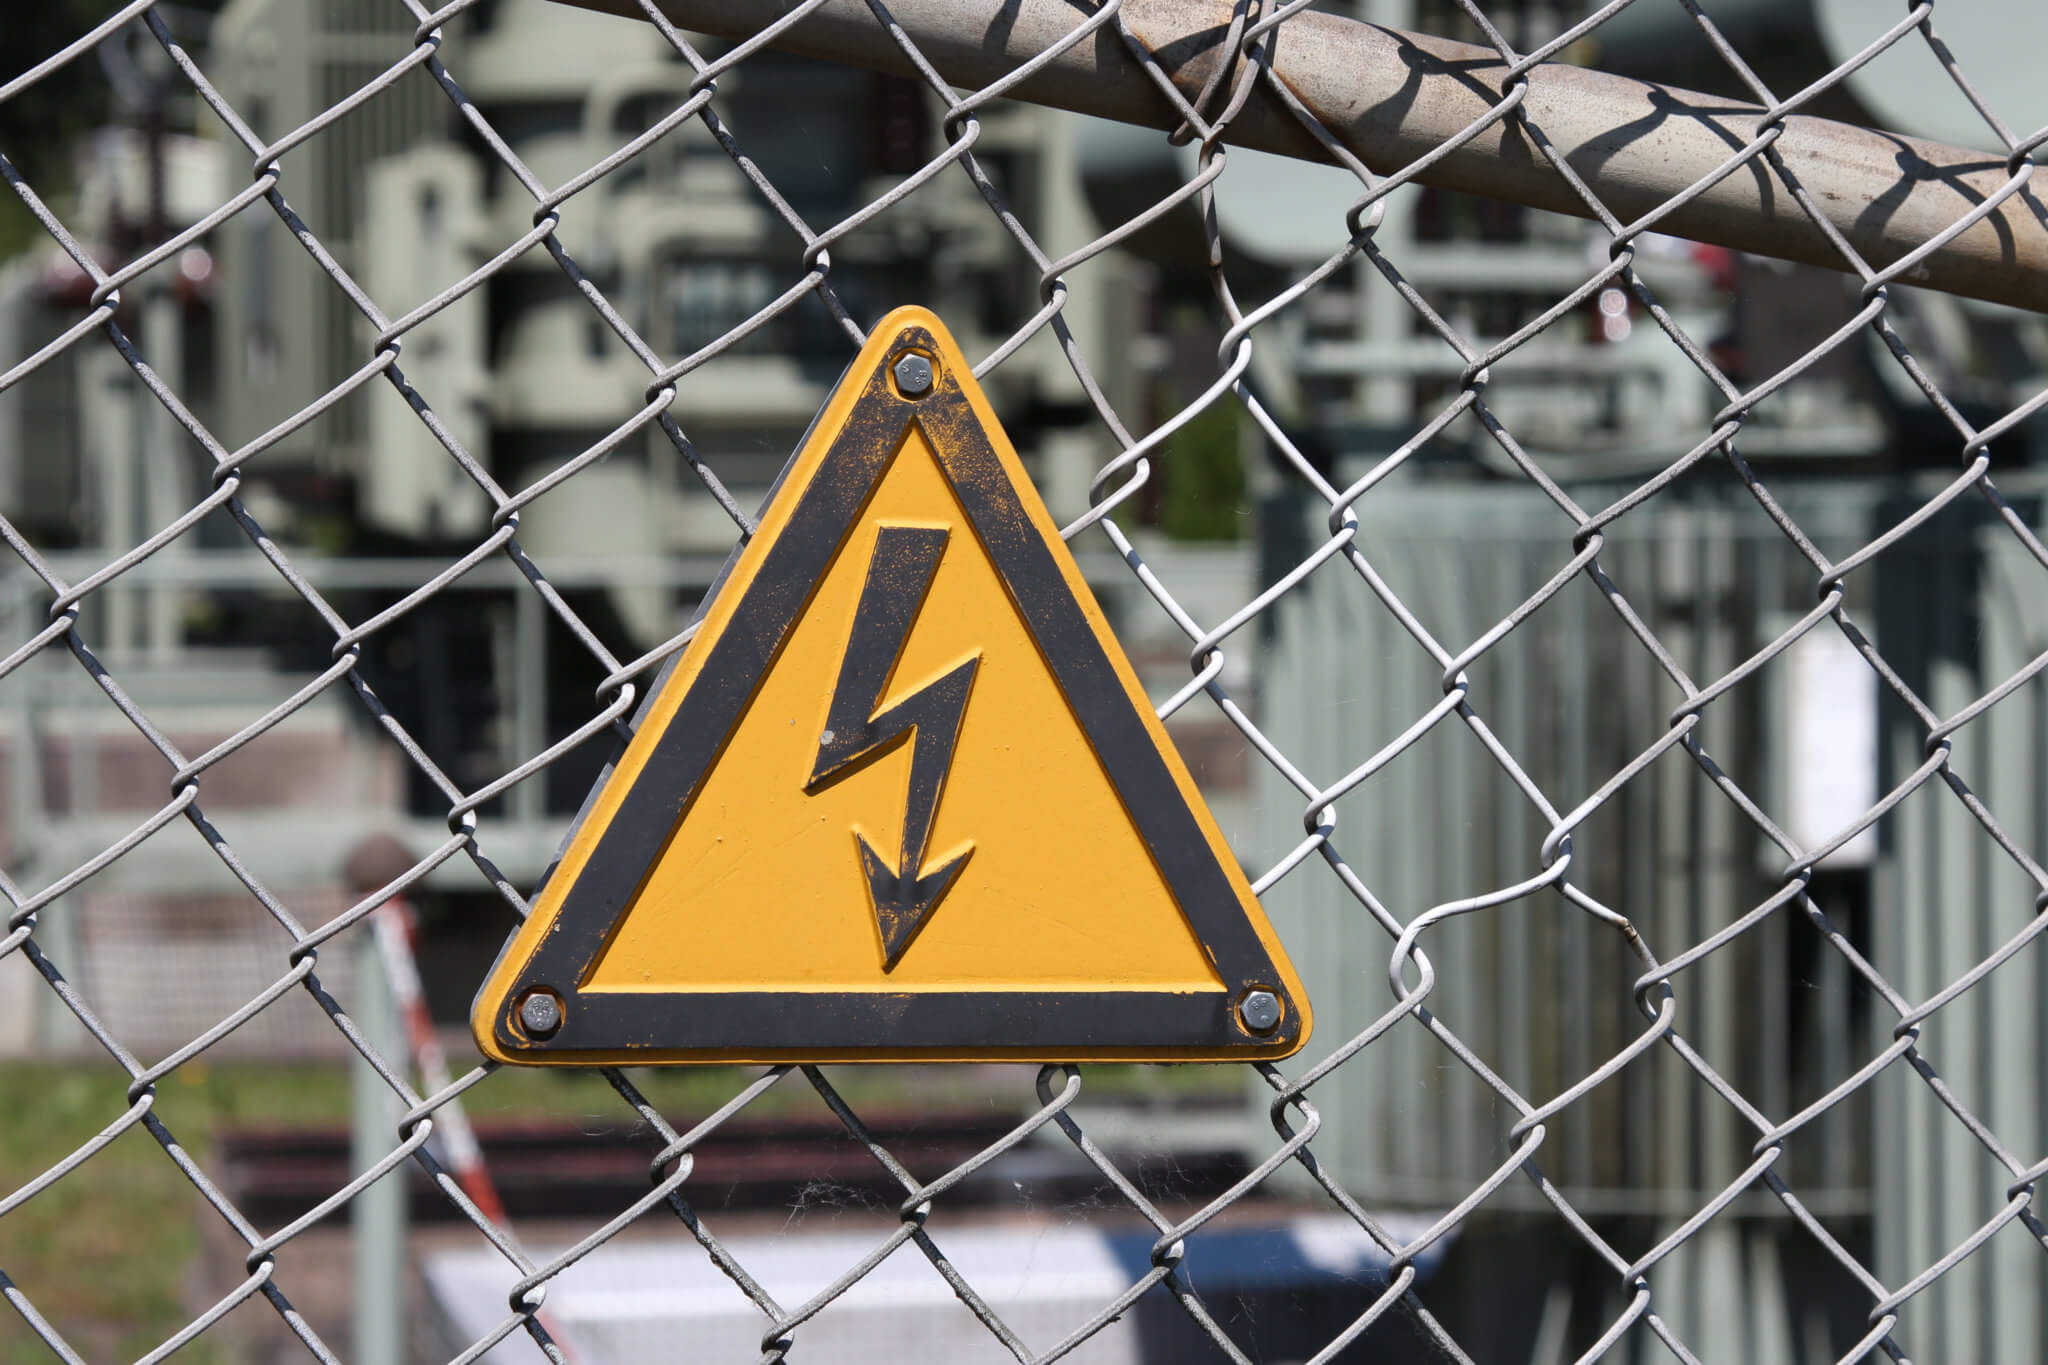 Electric shock safety signage at a renewable energy facility.